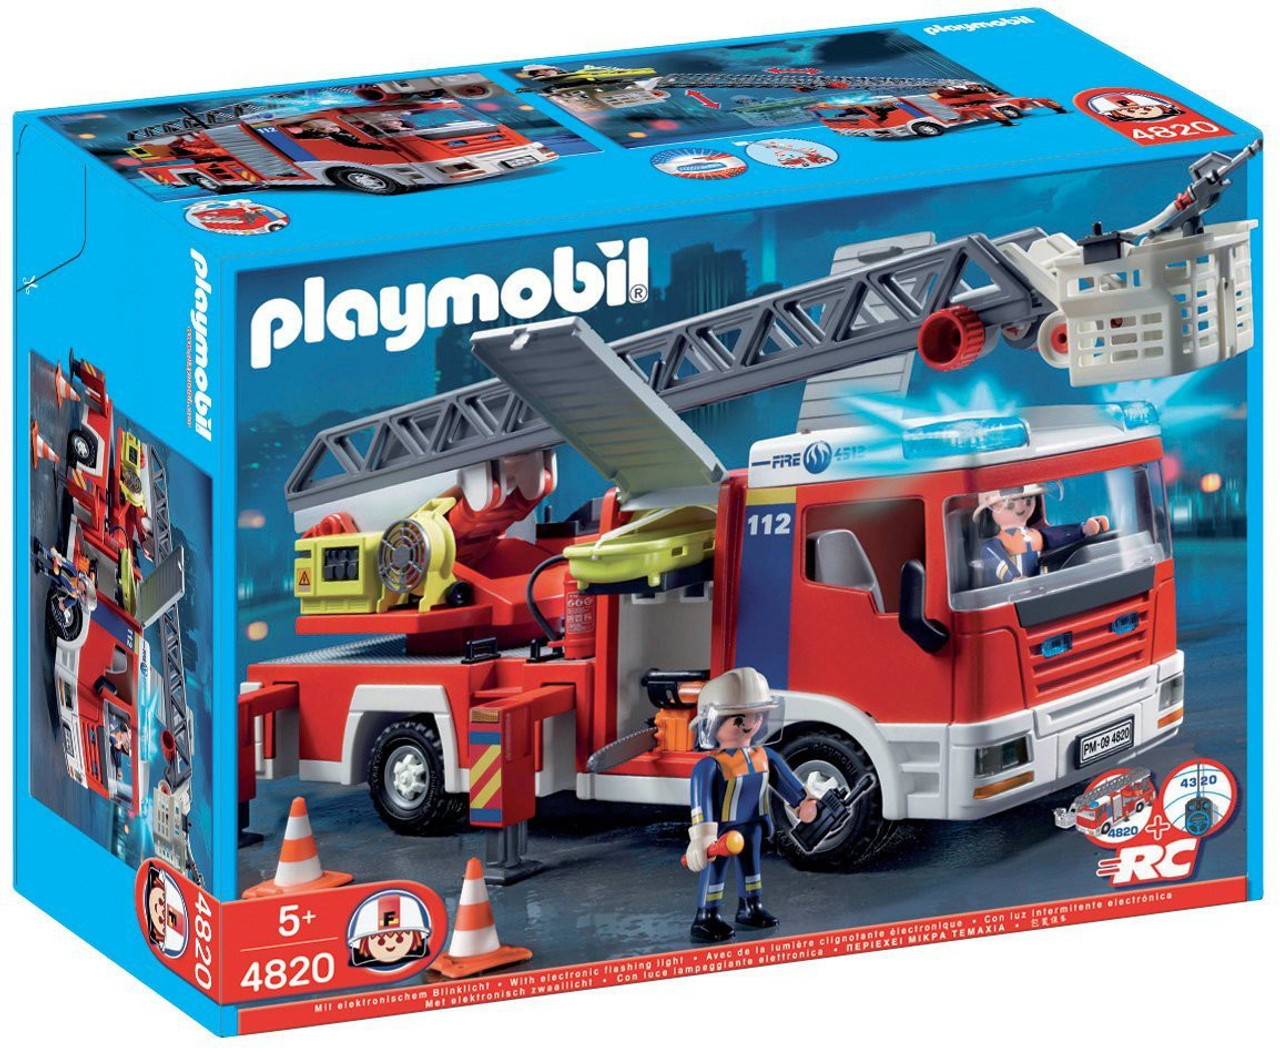 Playmobil Rescue Ladder Unit Set 4820 Damaged Package Toywiz - ninja dojo with ladders and spawn roblox